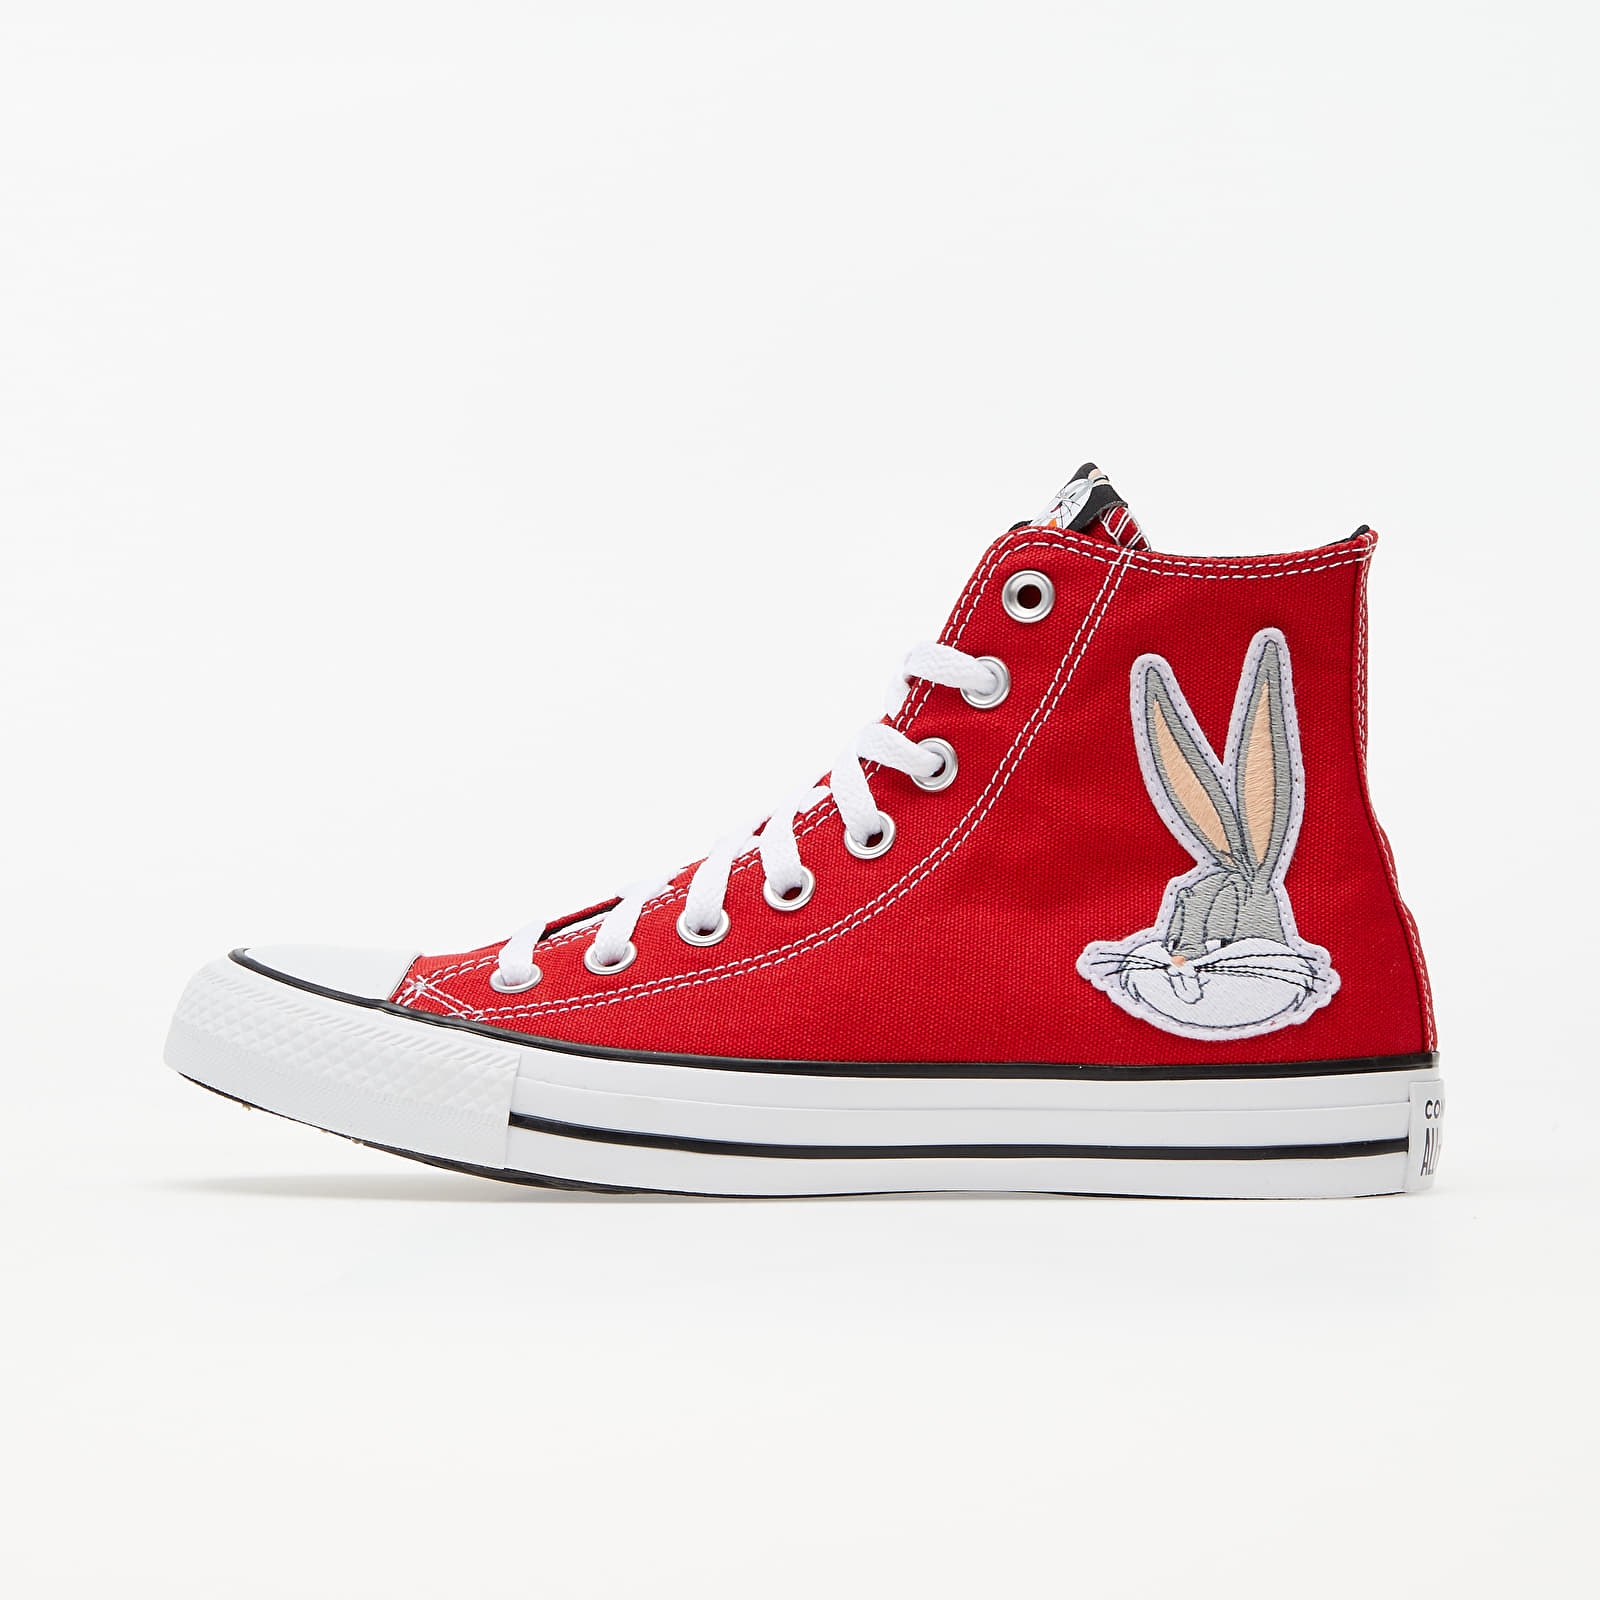 Converse x Bugs Bunny Chuck Taylor All Star Hi Red/ White 169224C